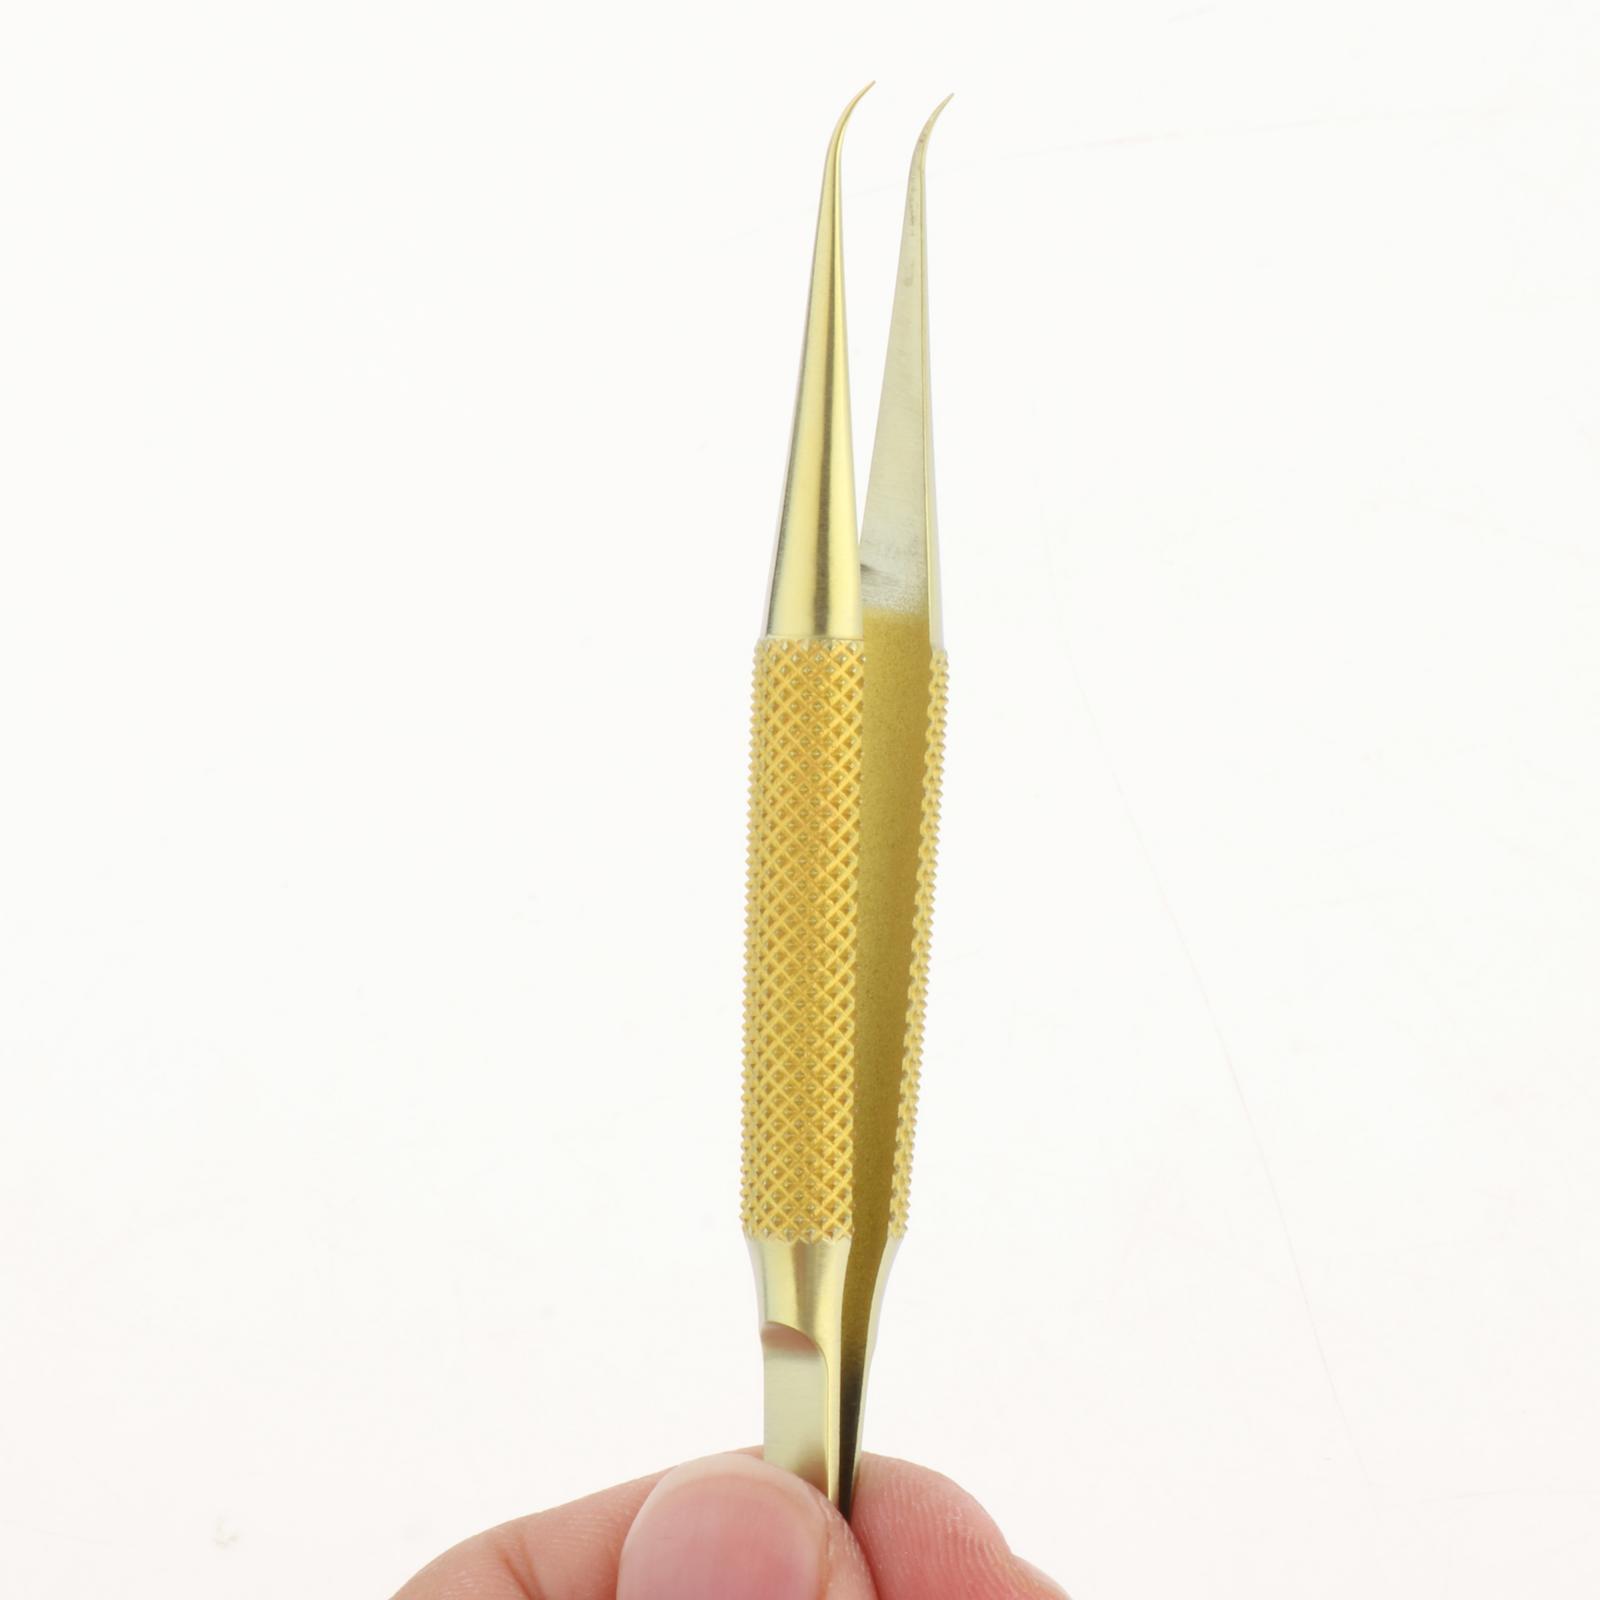 Titanium Alloy Tweezers Precision Jump Line for Mobile Phone Main Board Curved